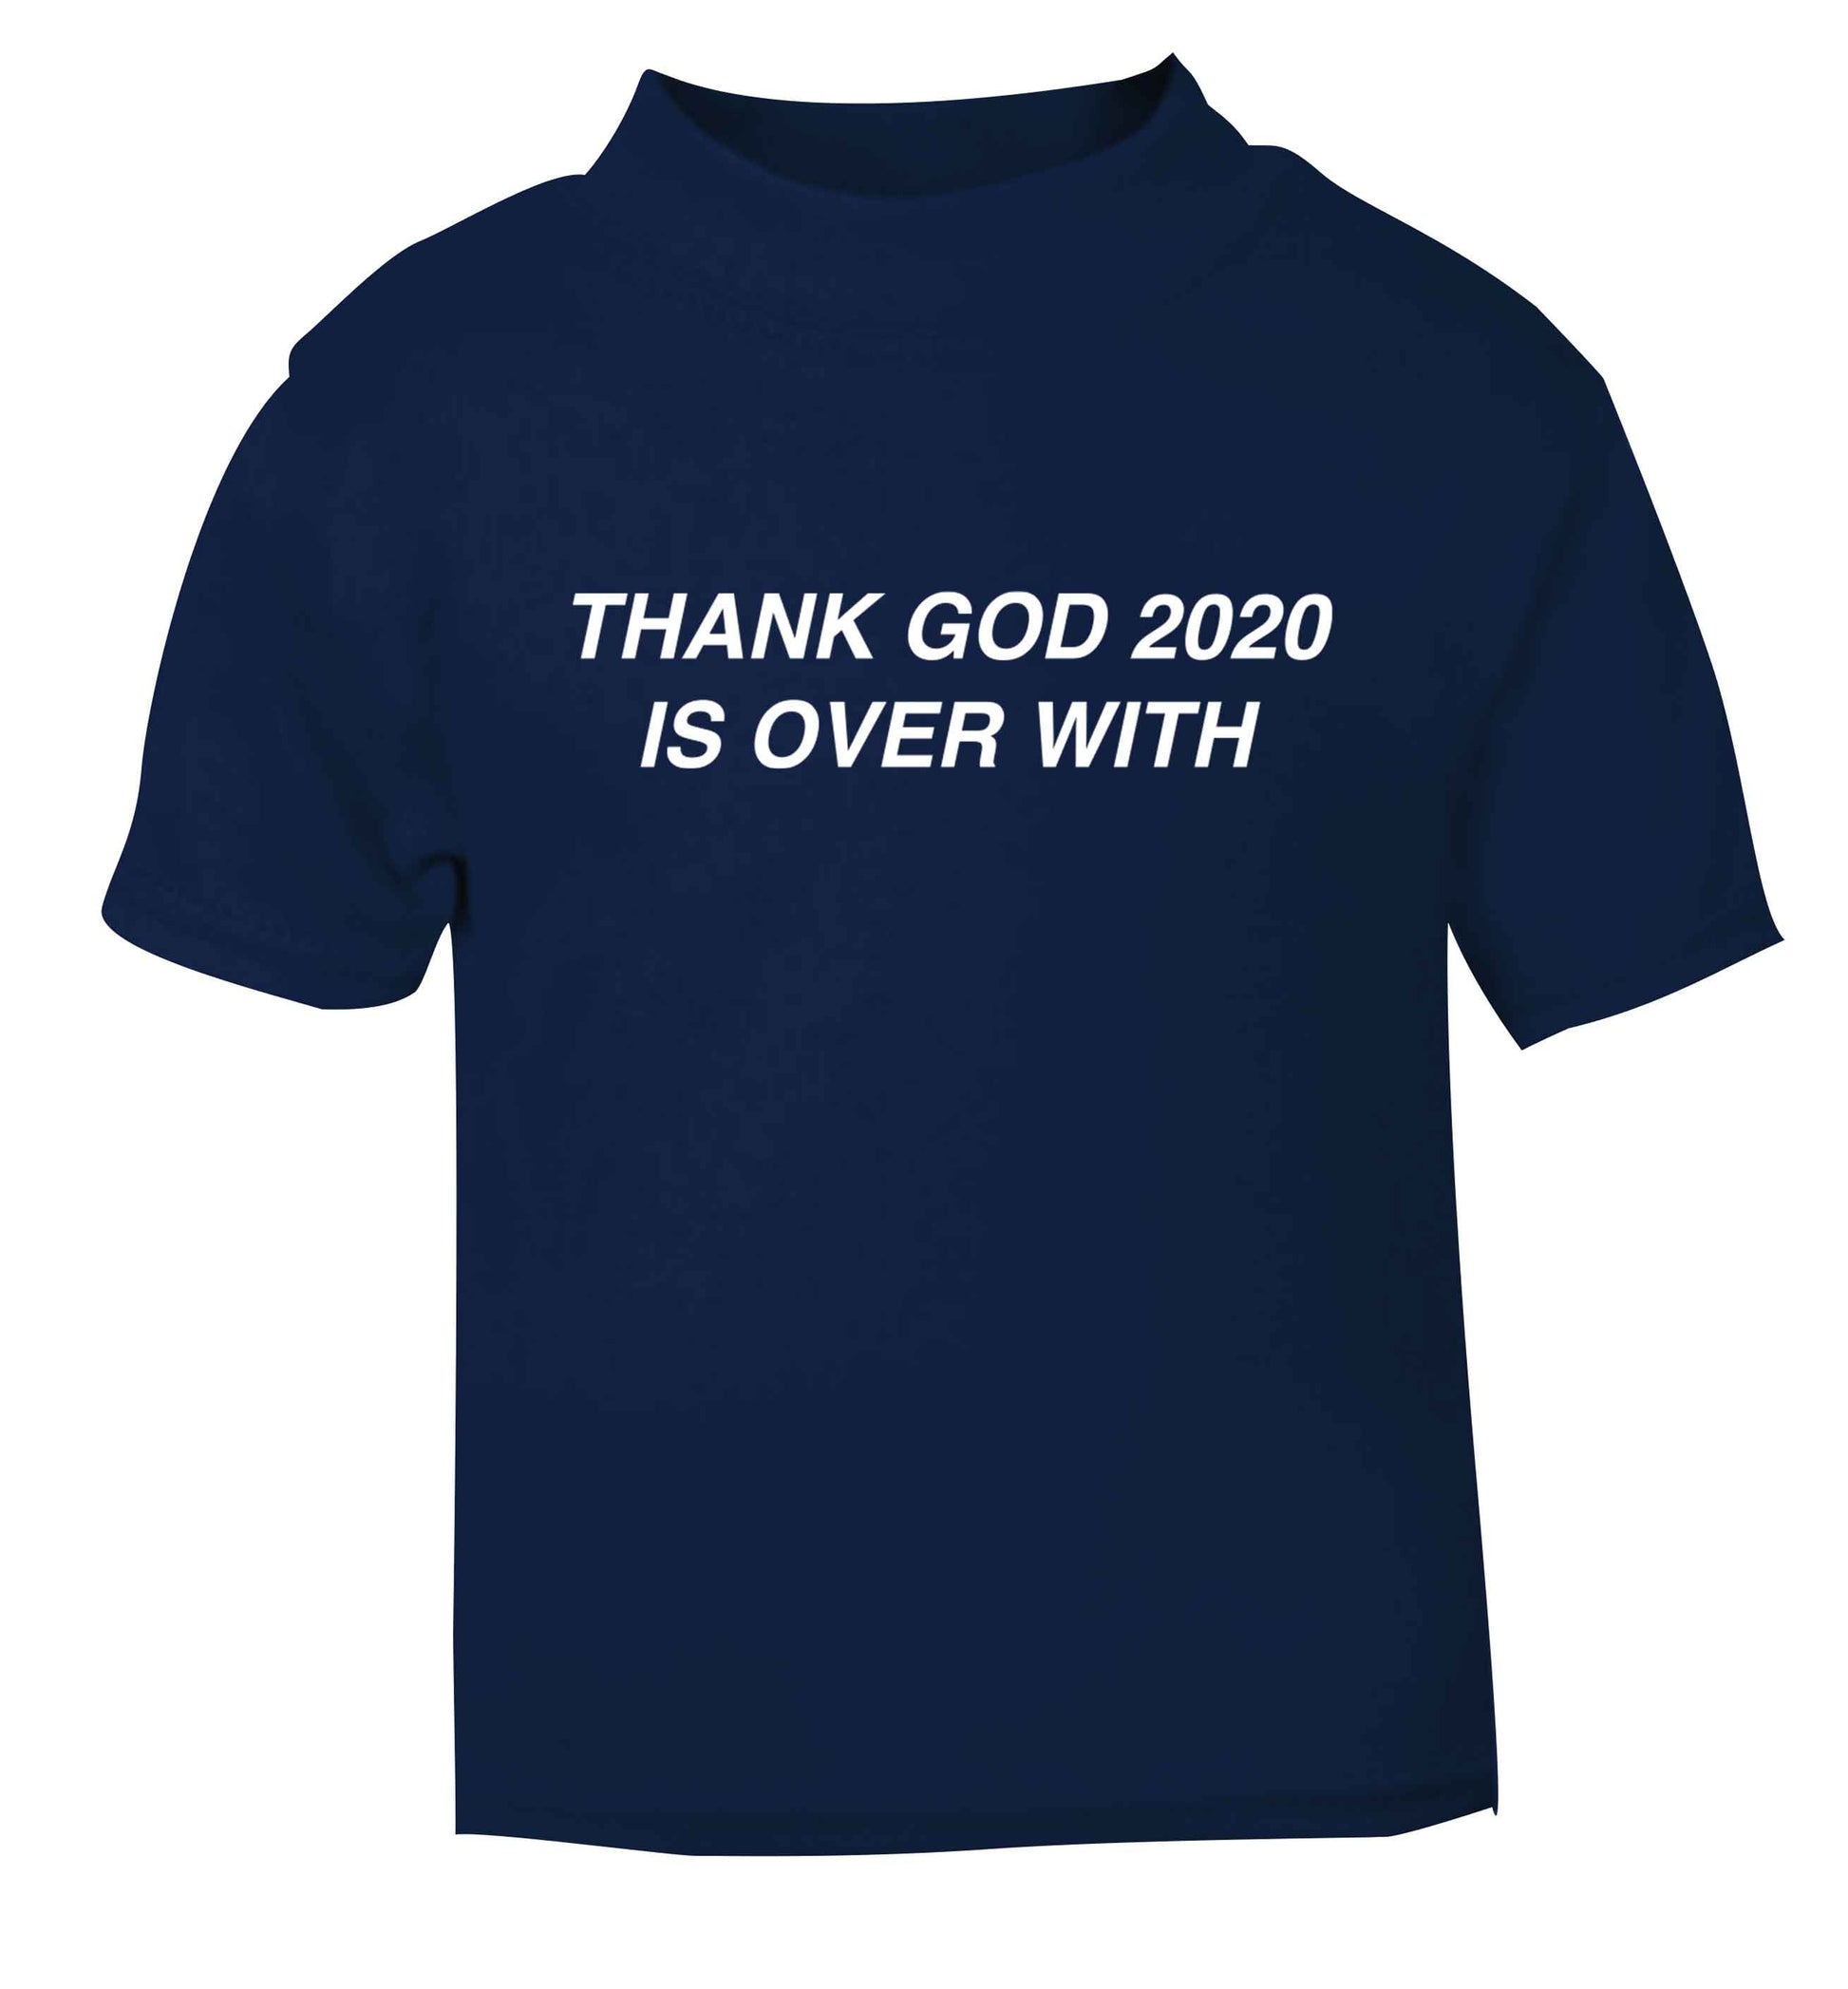 Thank god 2020 is over with navy baby toddler Tshirt 2 Years